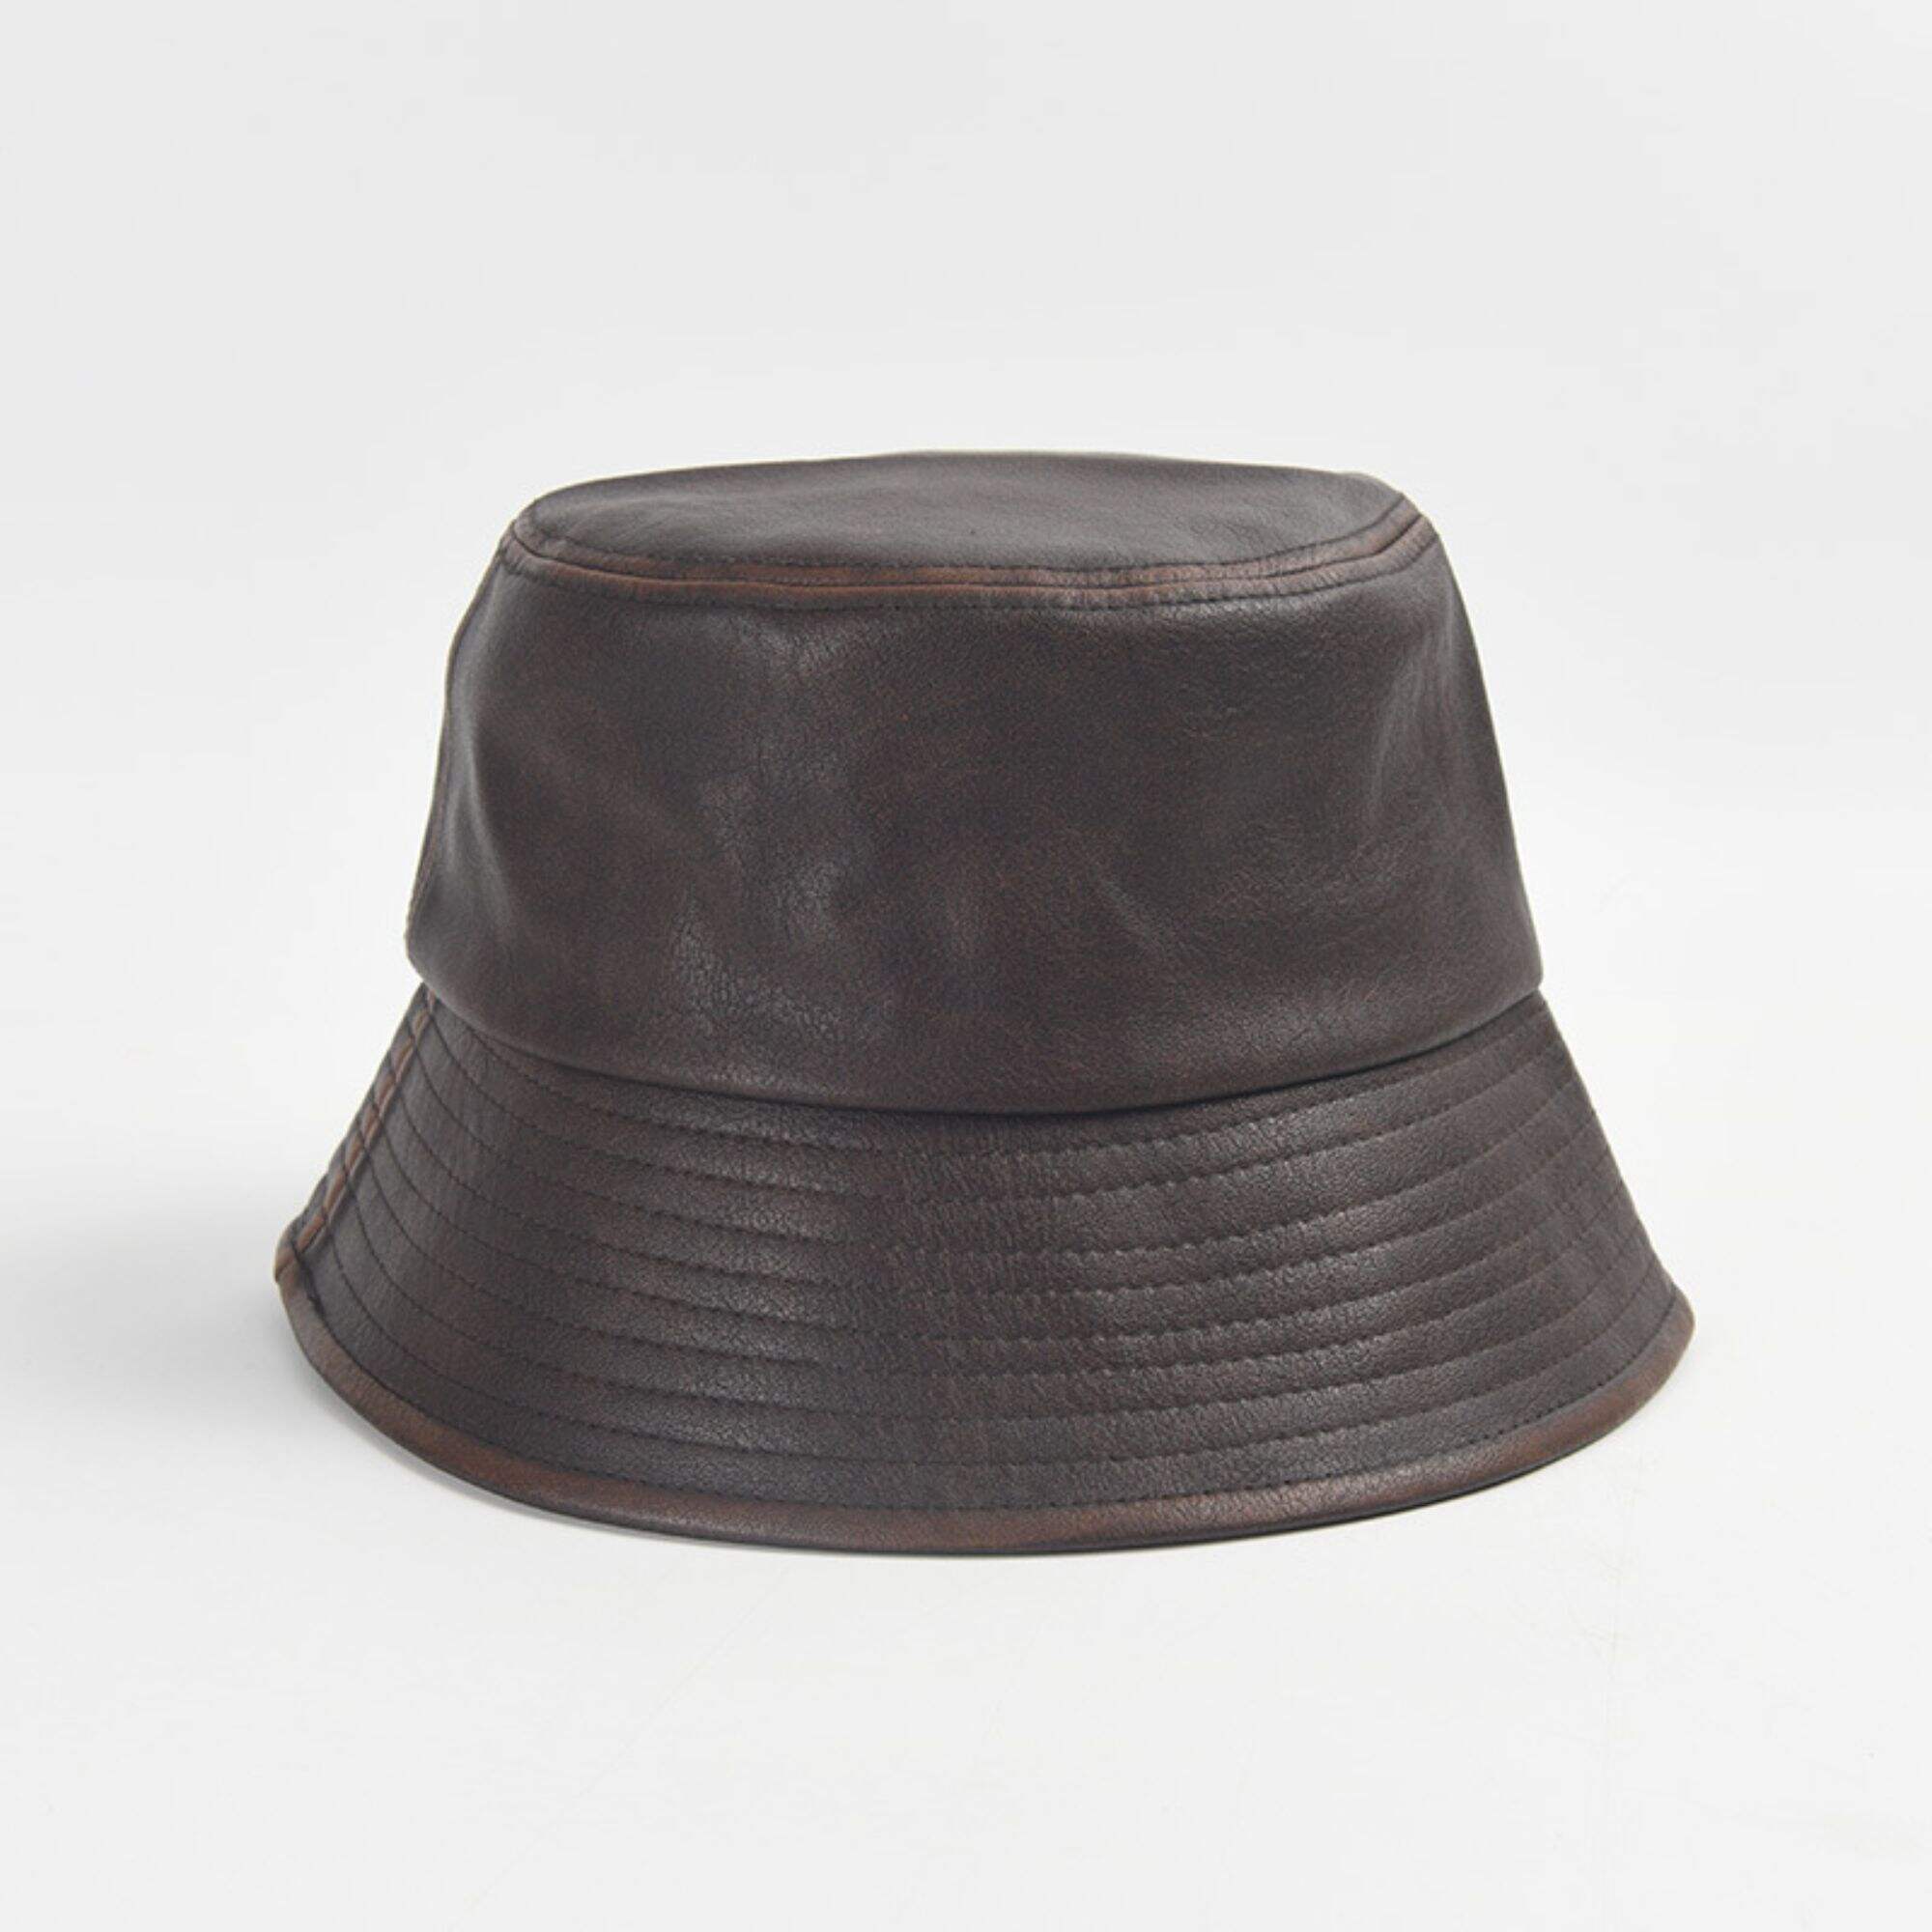 Make old washed PU leather bucket hat